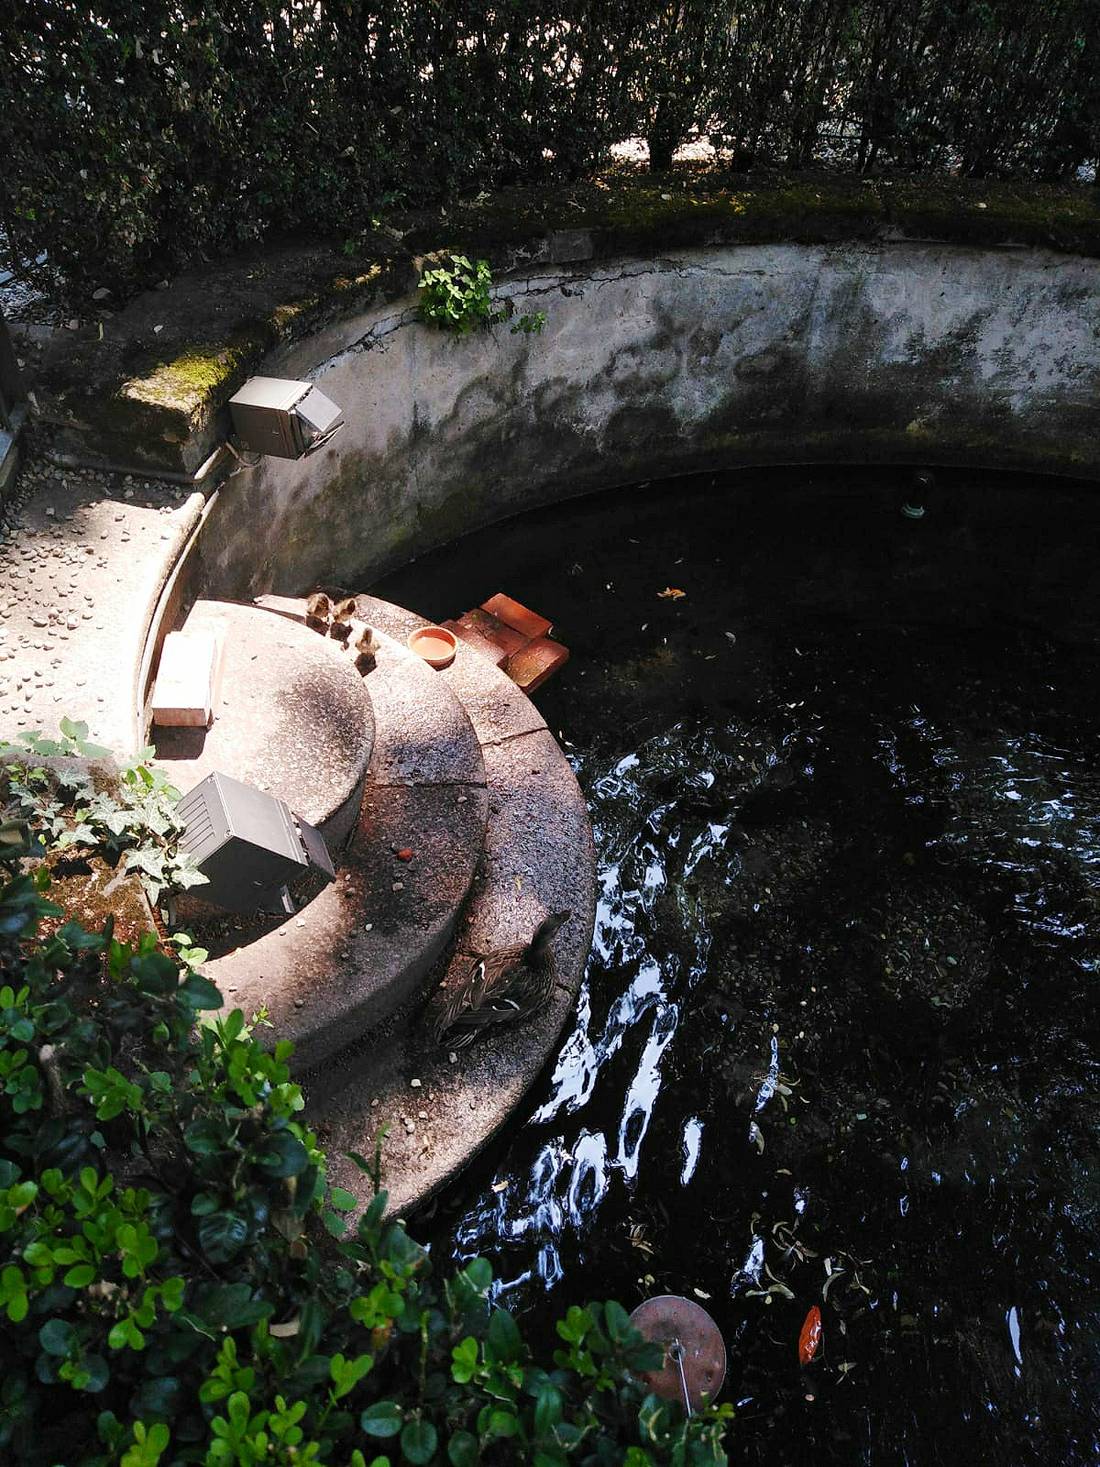 A fountain in the middle of the garden